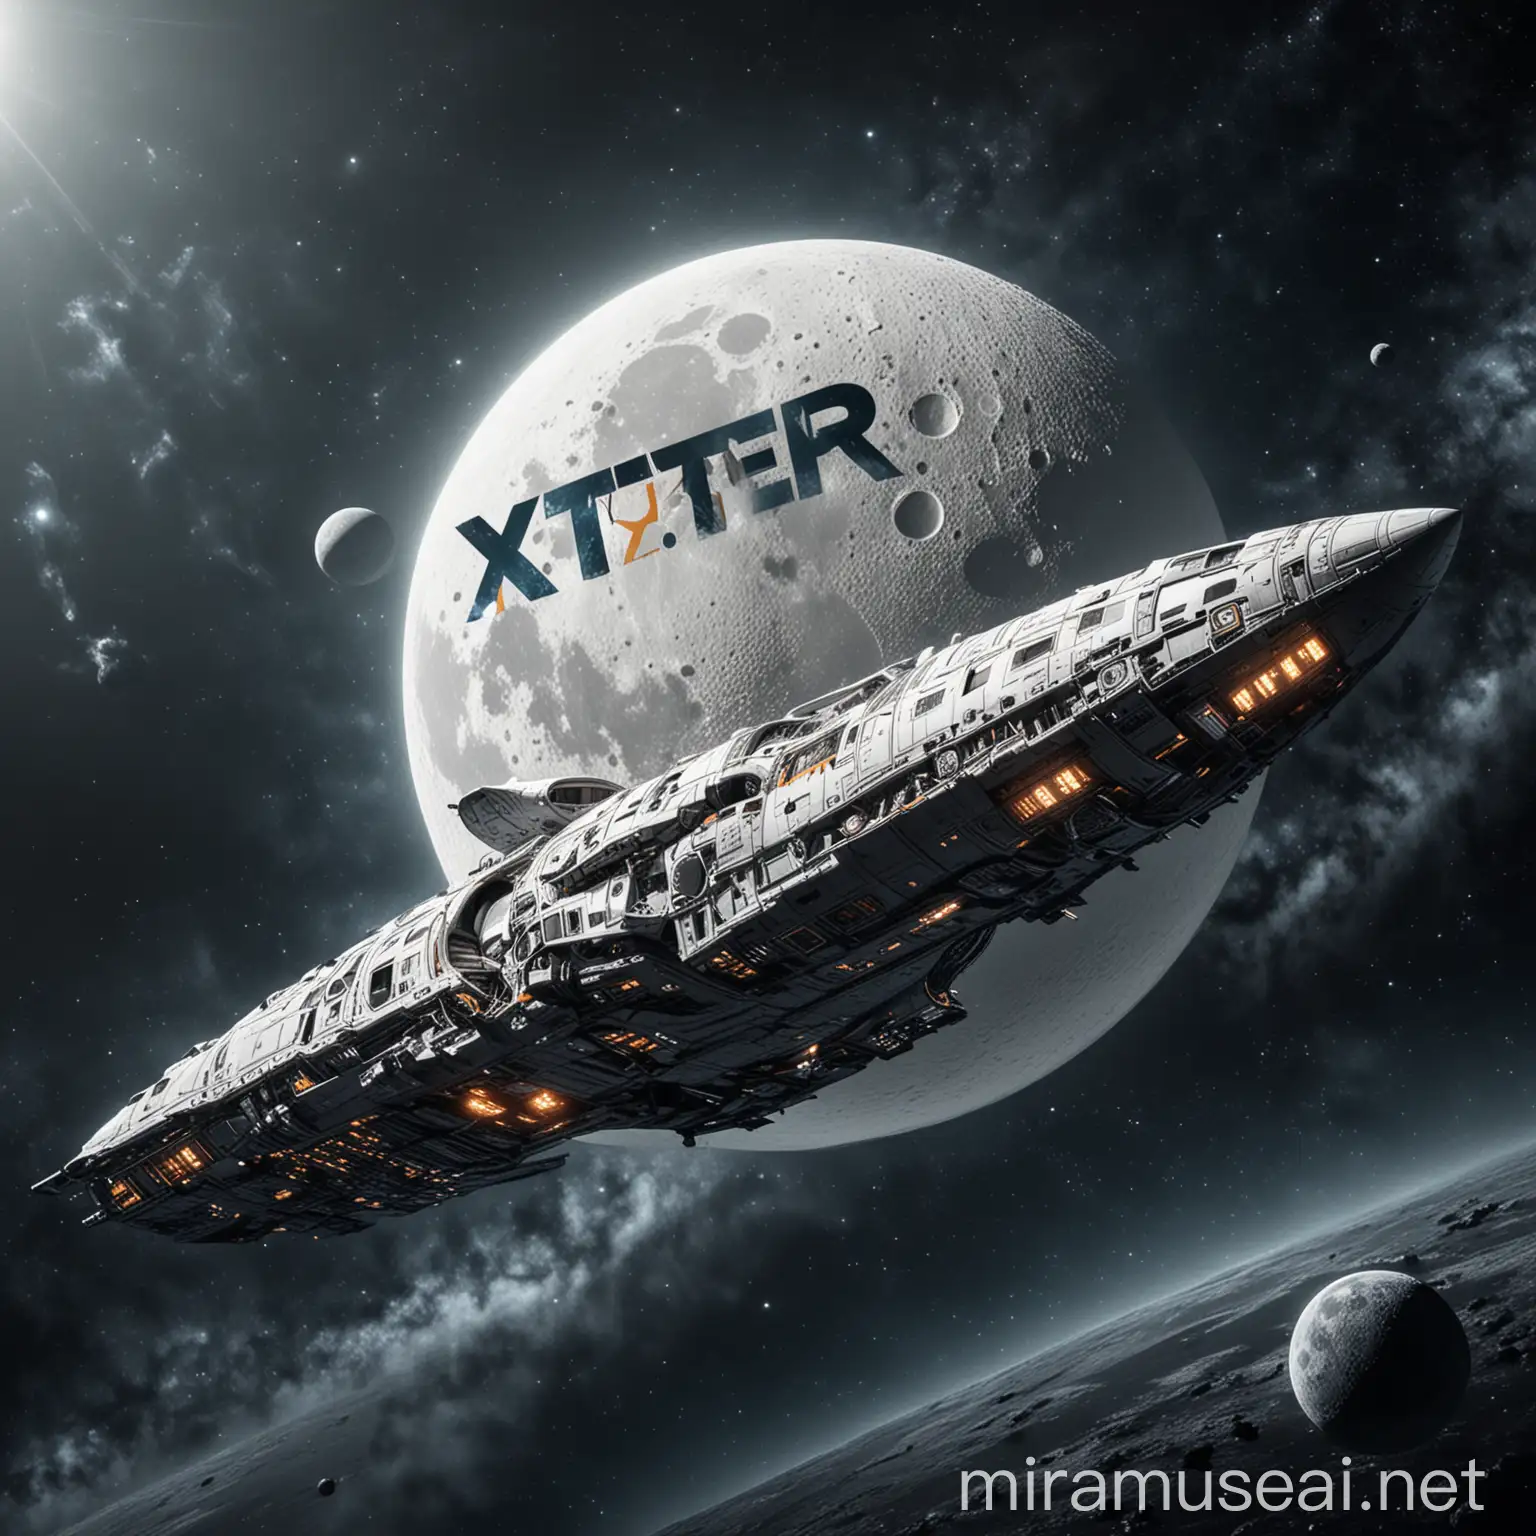 XTER Logo on Space Moon Ship Futuristic Design in Outer Space